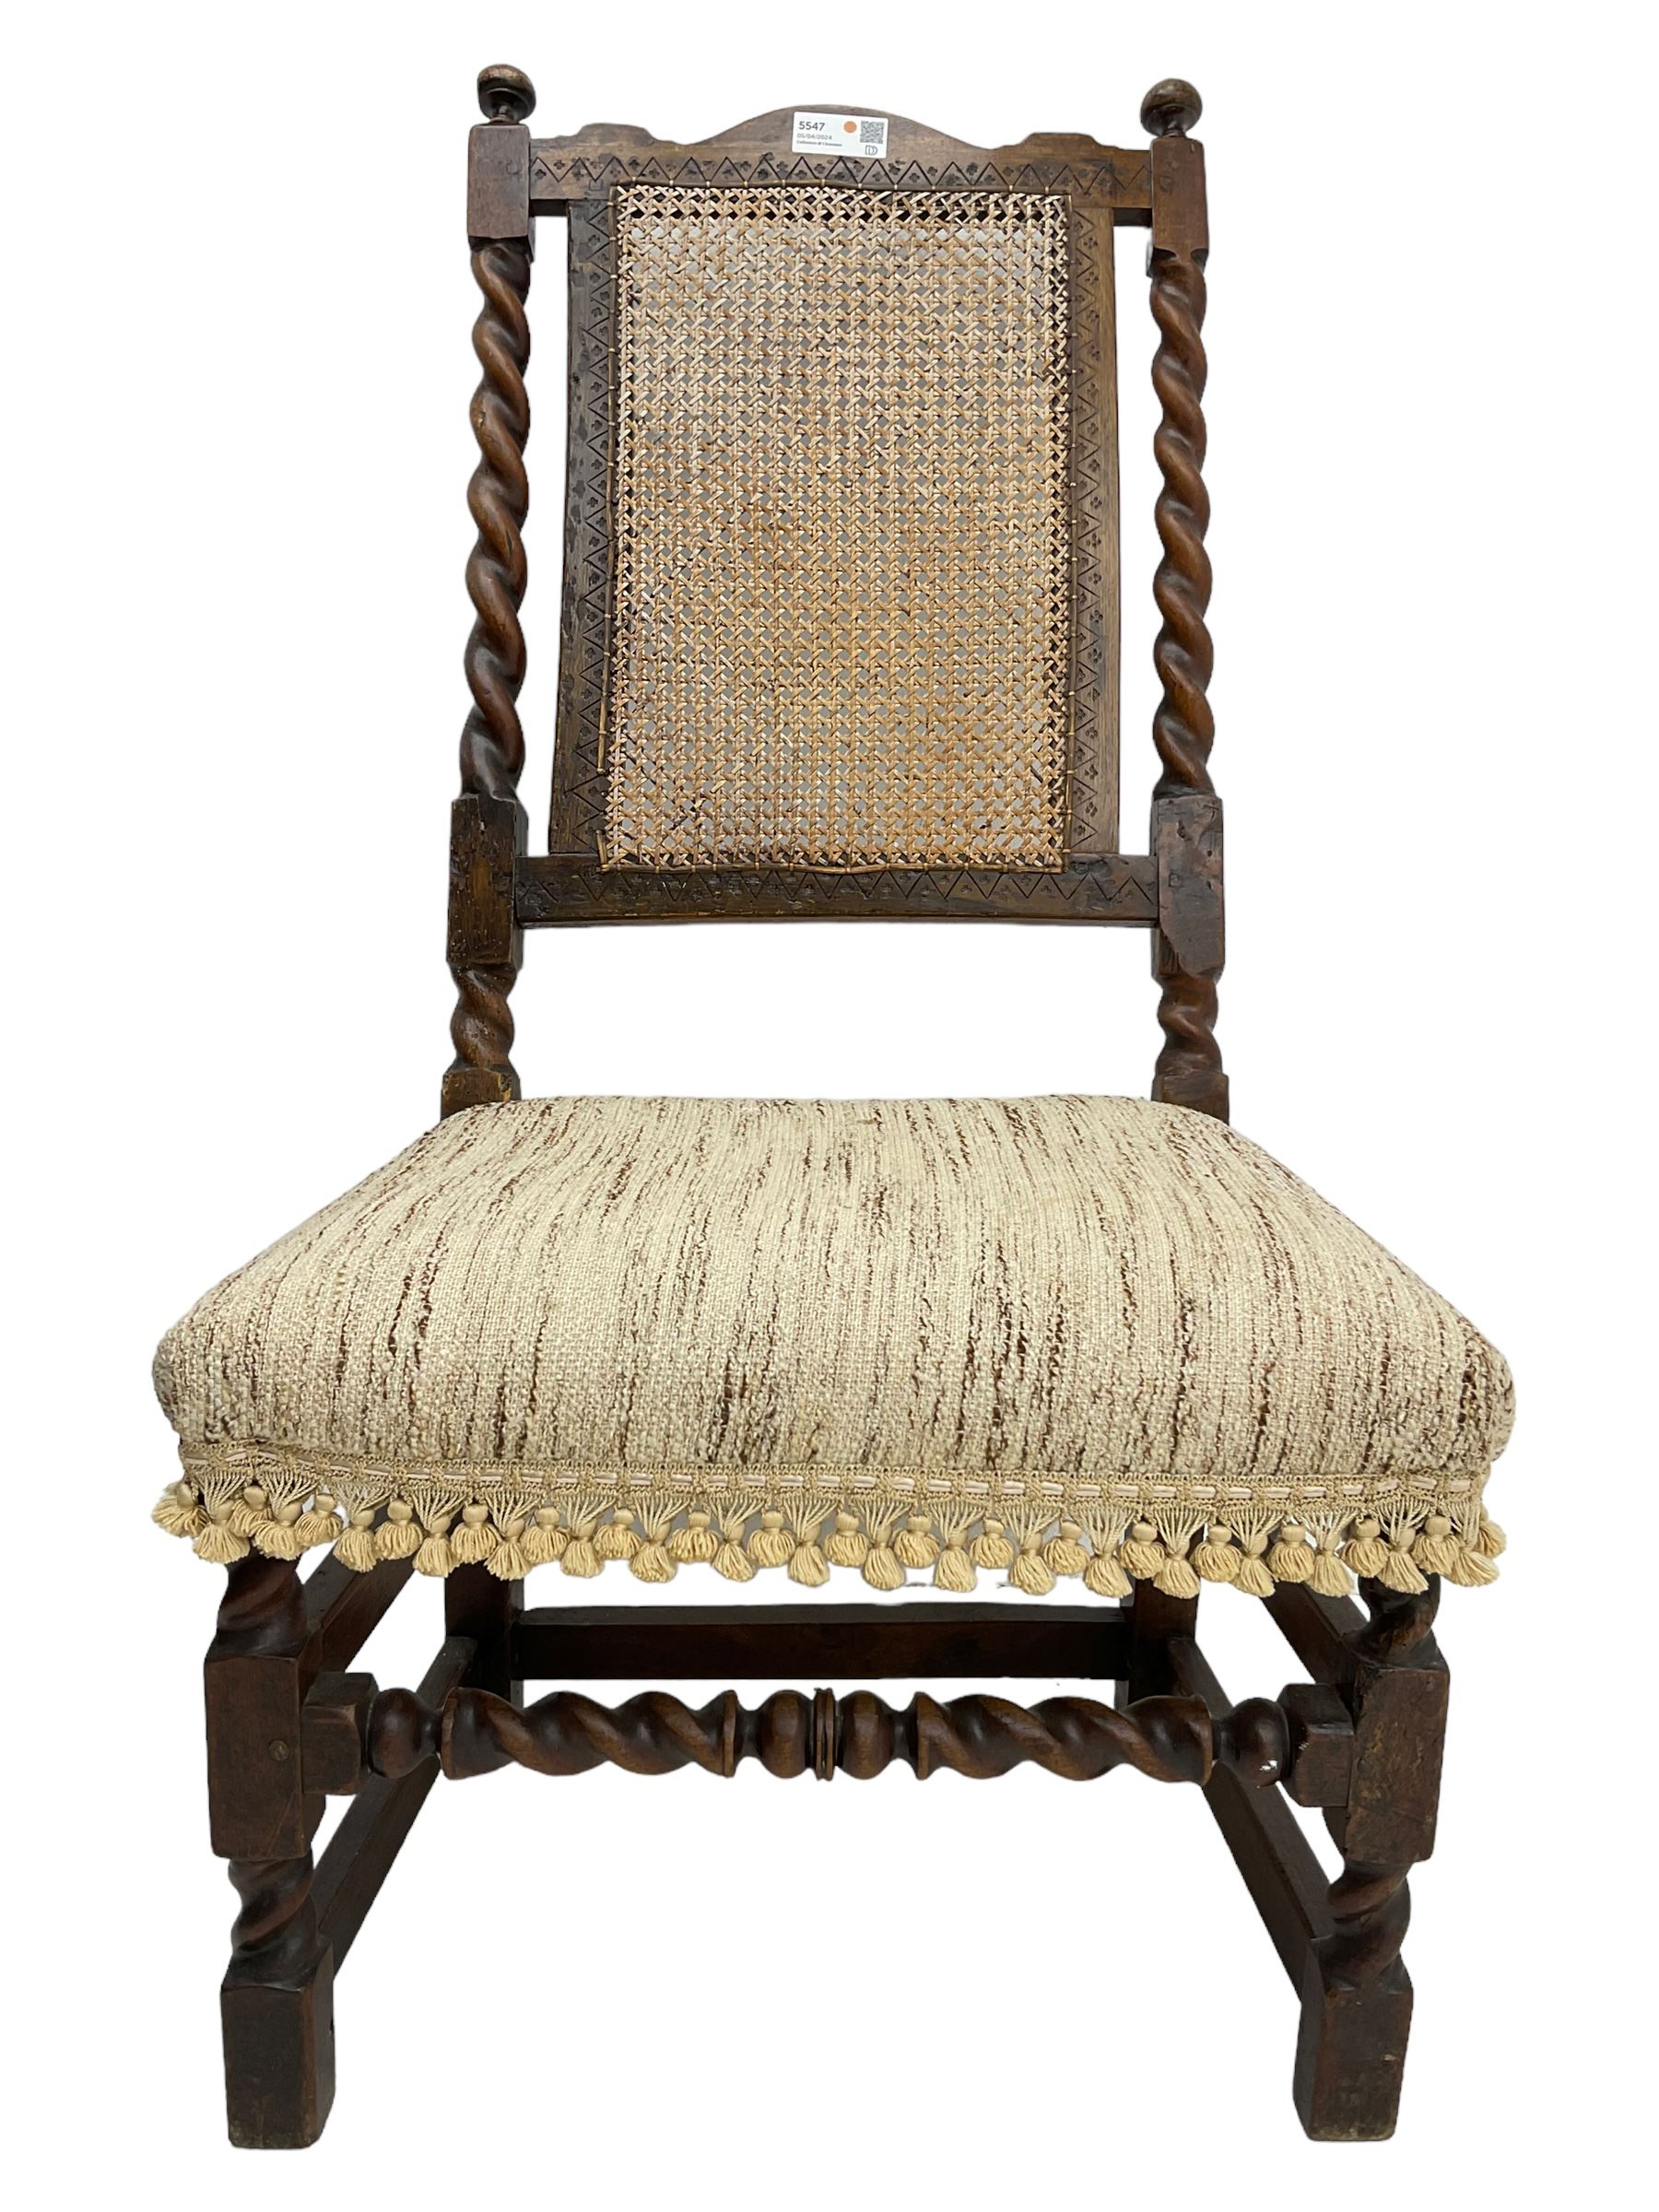 18th century oak framed hall chair - Image 3 of 3